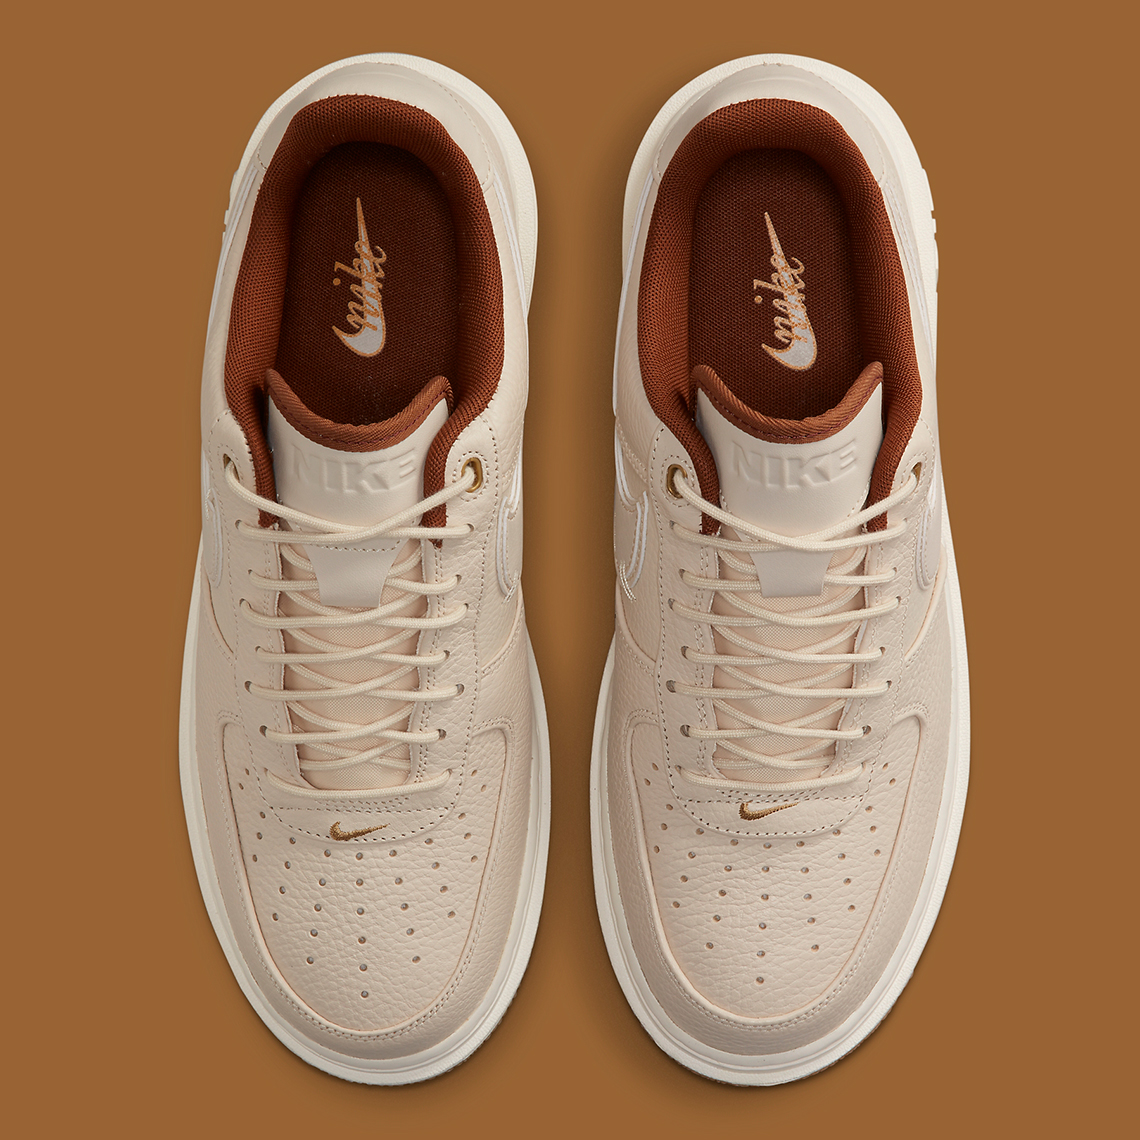 Nike Air Force 1 Low Luxe DB4109-200 DB4109-001 | SneakerNews.com